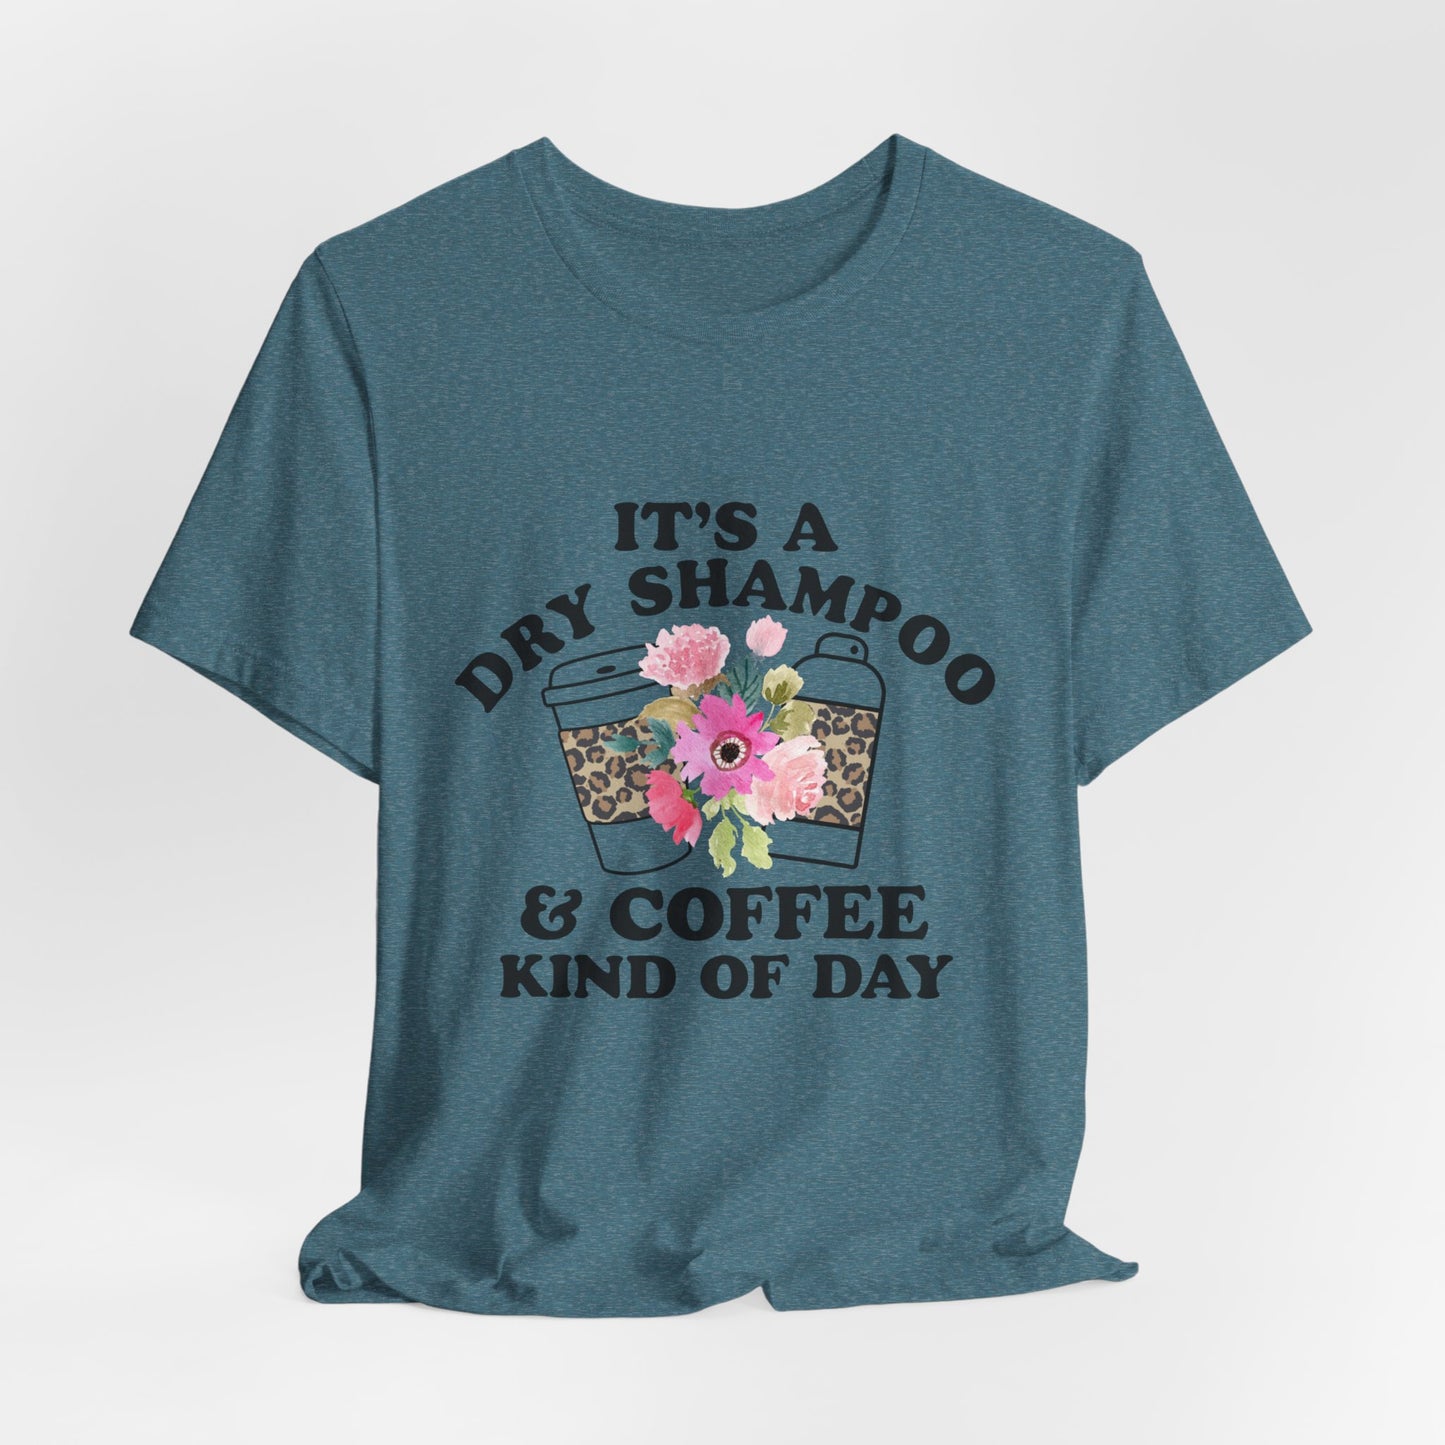 Dry Shampoo and Coffee Kind Of Day Women's Funny Short Sleeve Tshirt